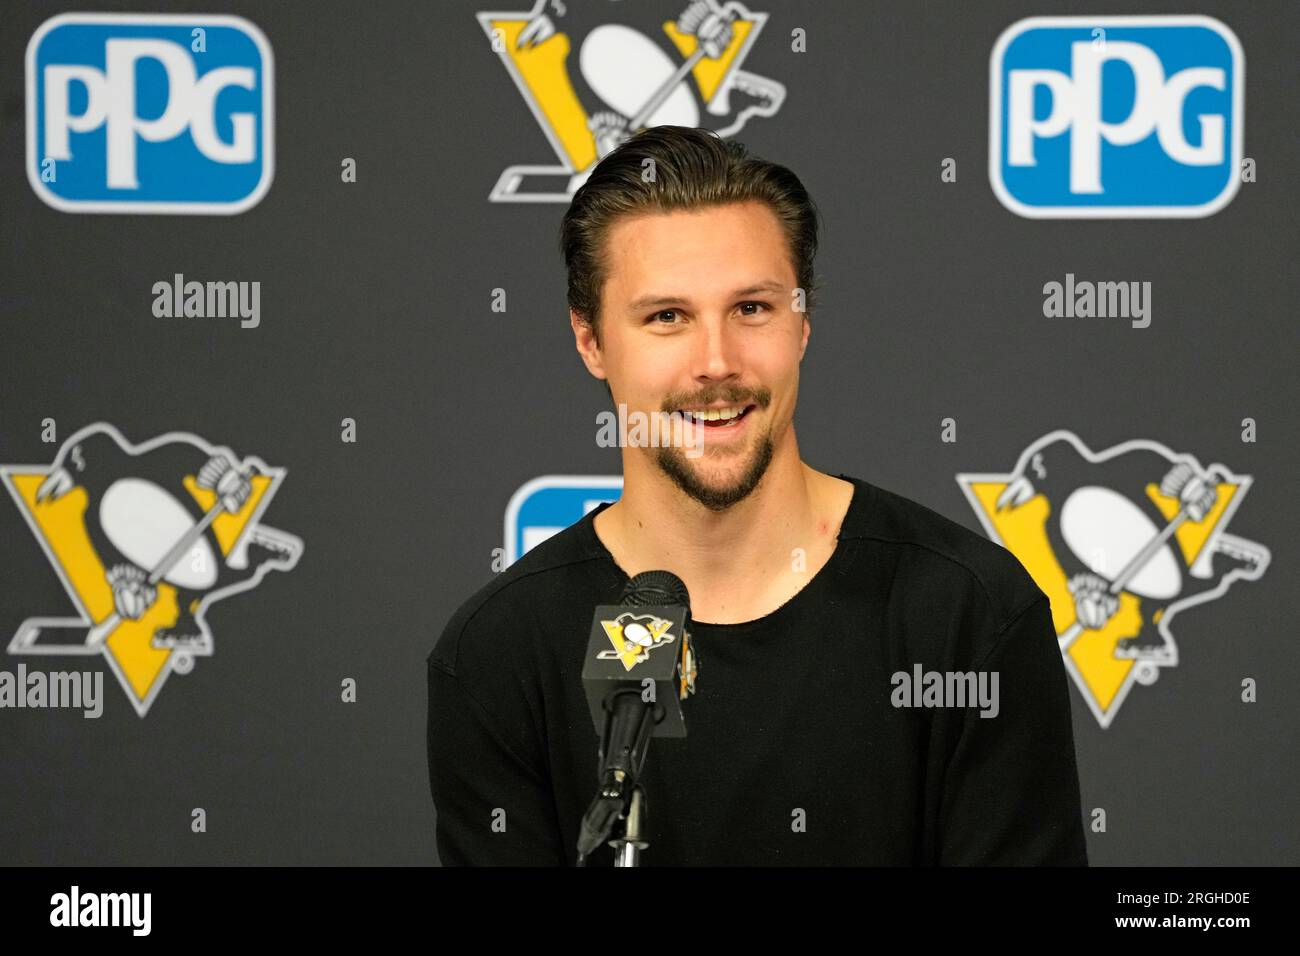 IN PHOTOS: Erik Karlsson sports Penguins threads as he joins his new  teammates for practice